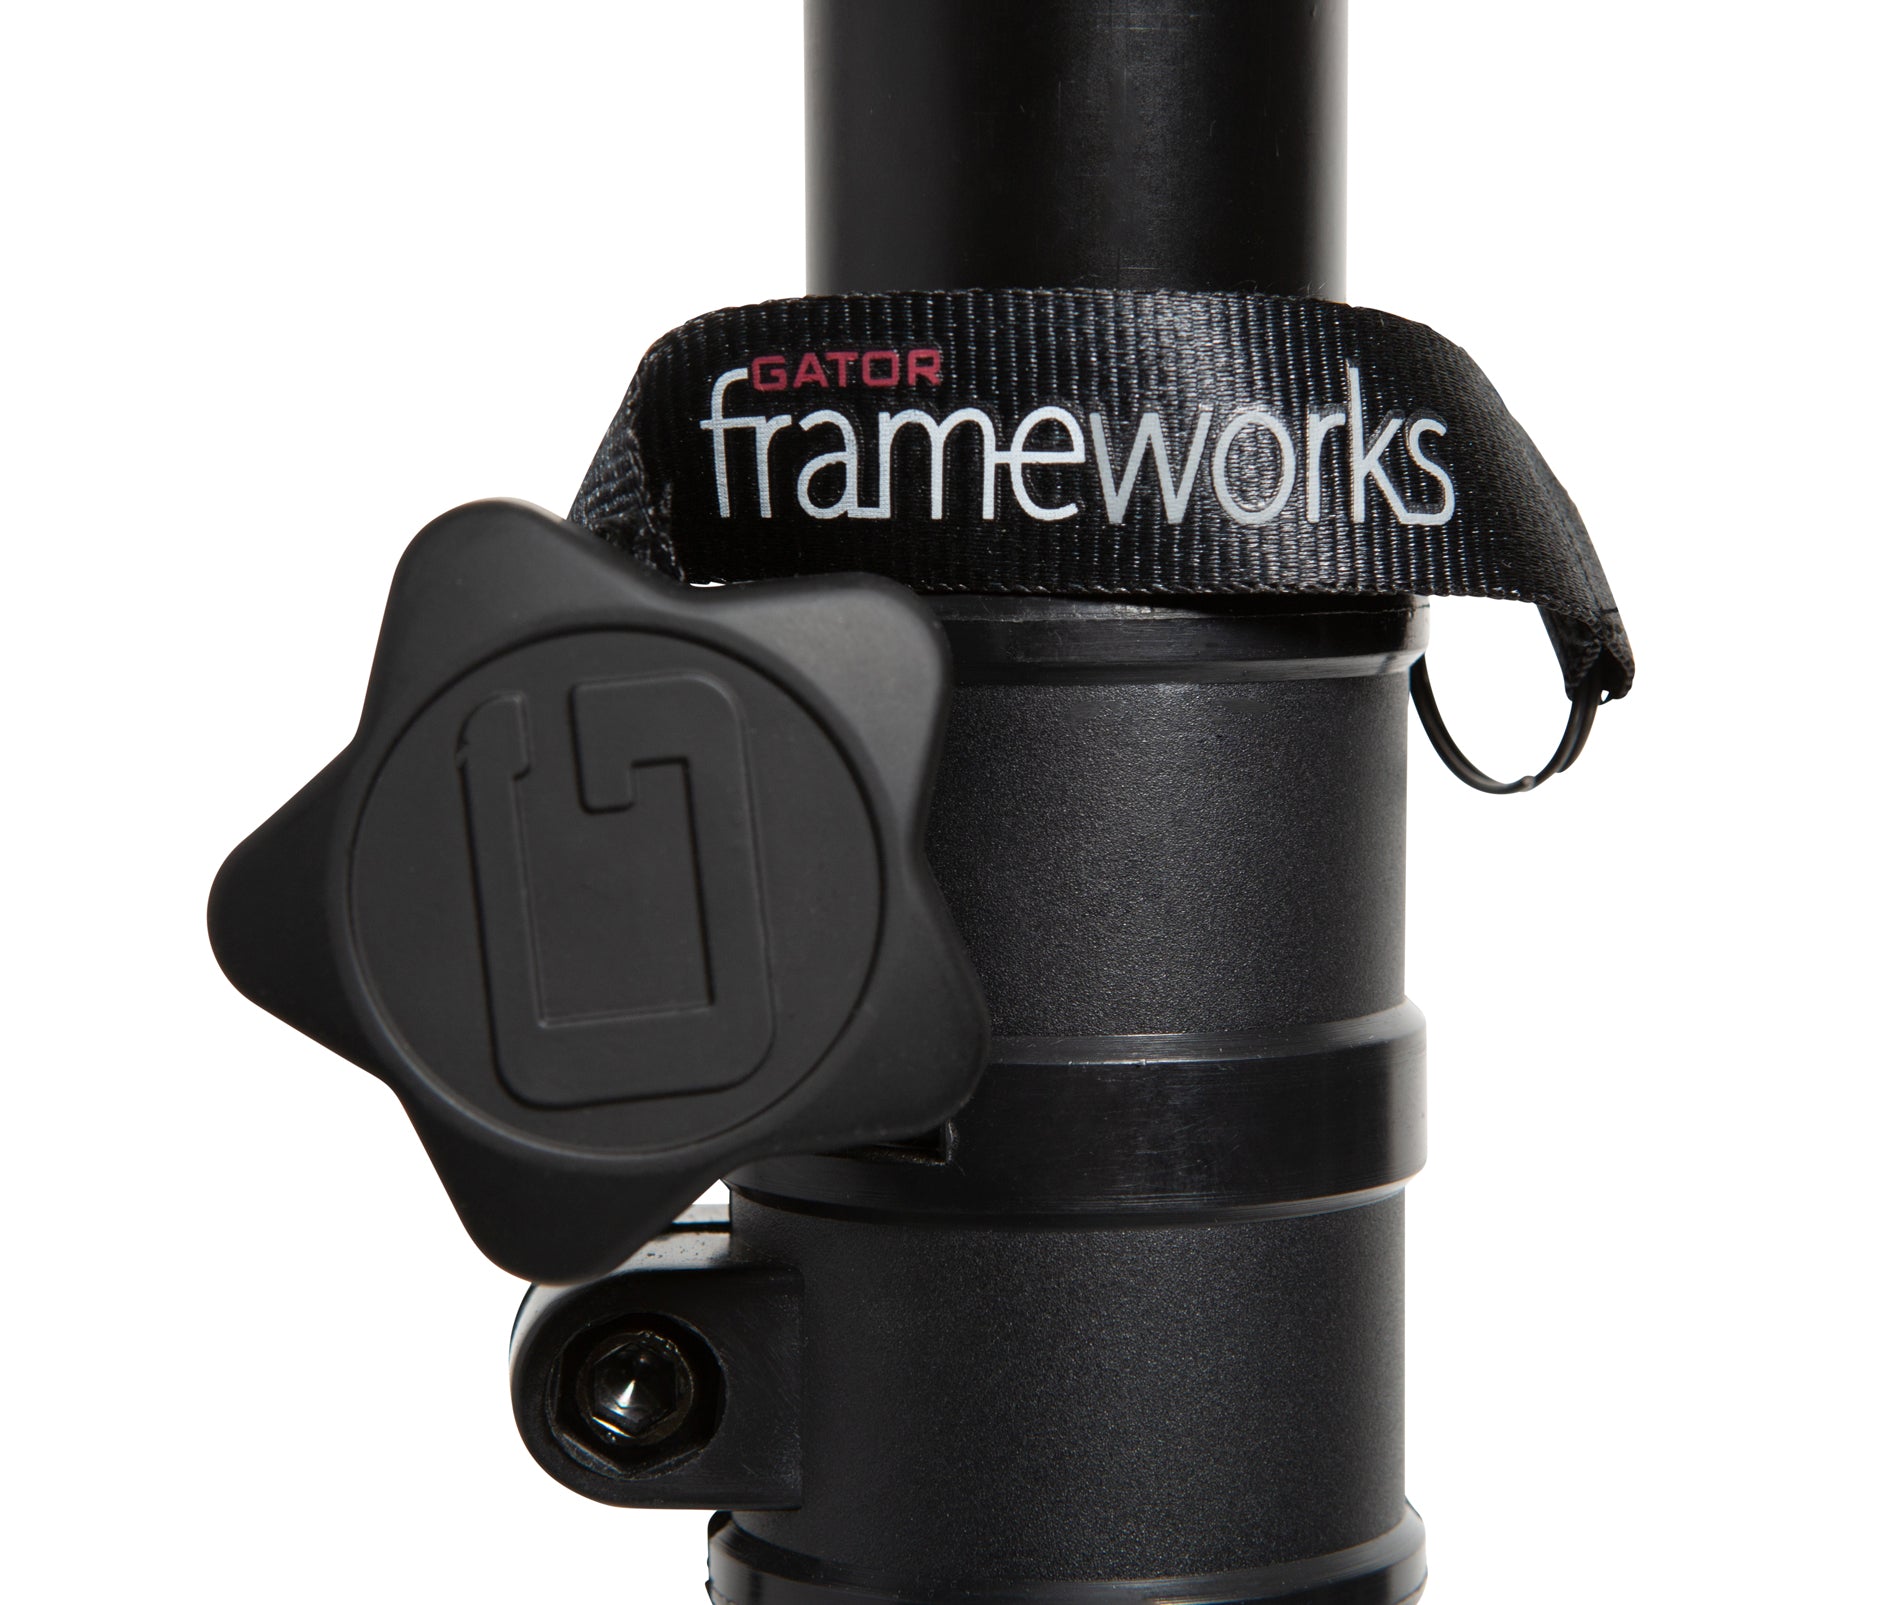 Gator Frameworks | Gfw- Quad (Non-Piston) Stand With Ls1 Top Bars